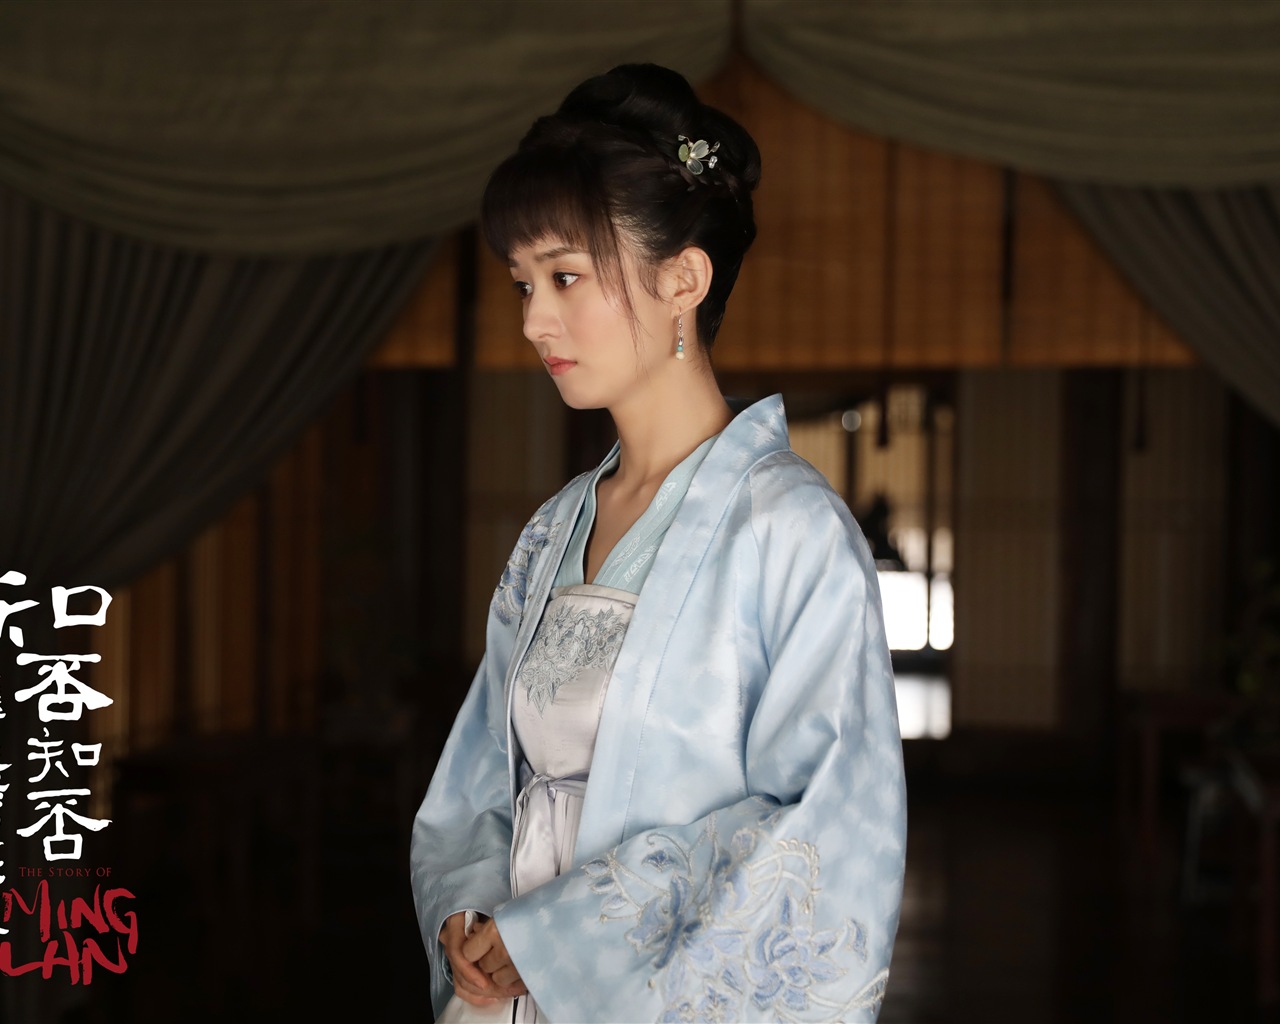 The Story Of MingLan, TV series HD wallpapers #45 - 1280x1024